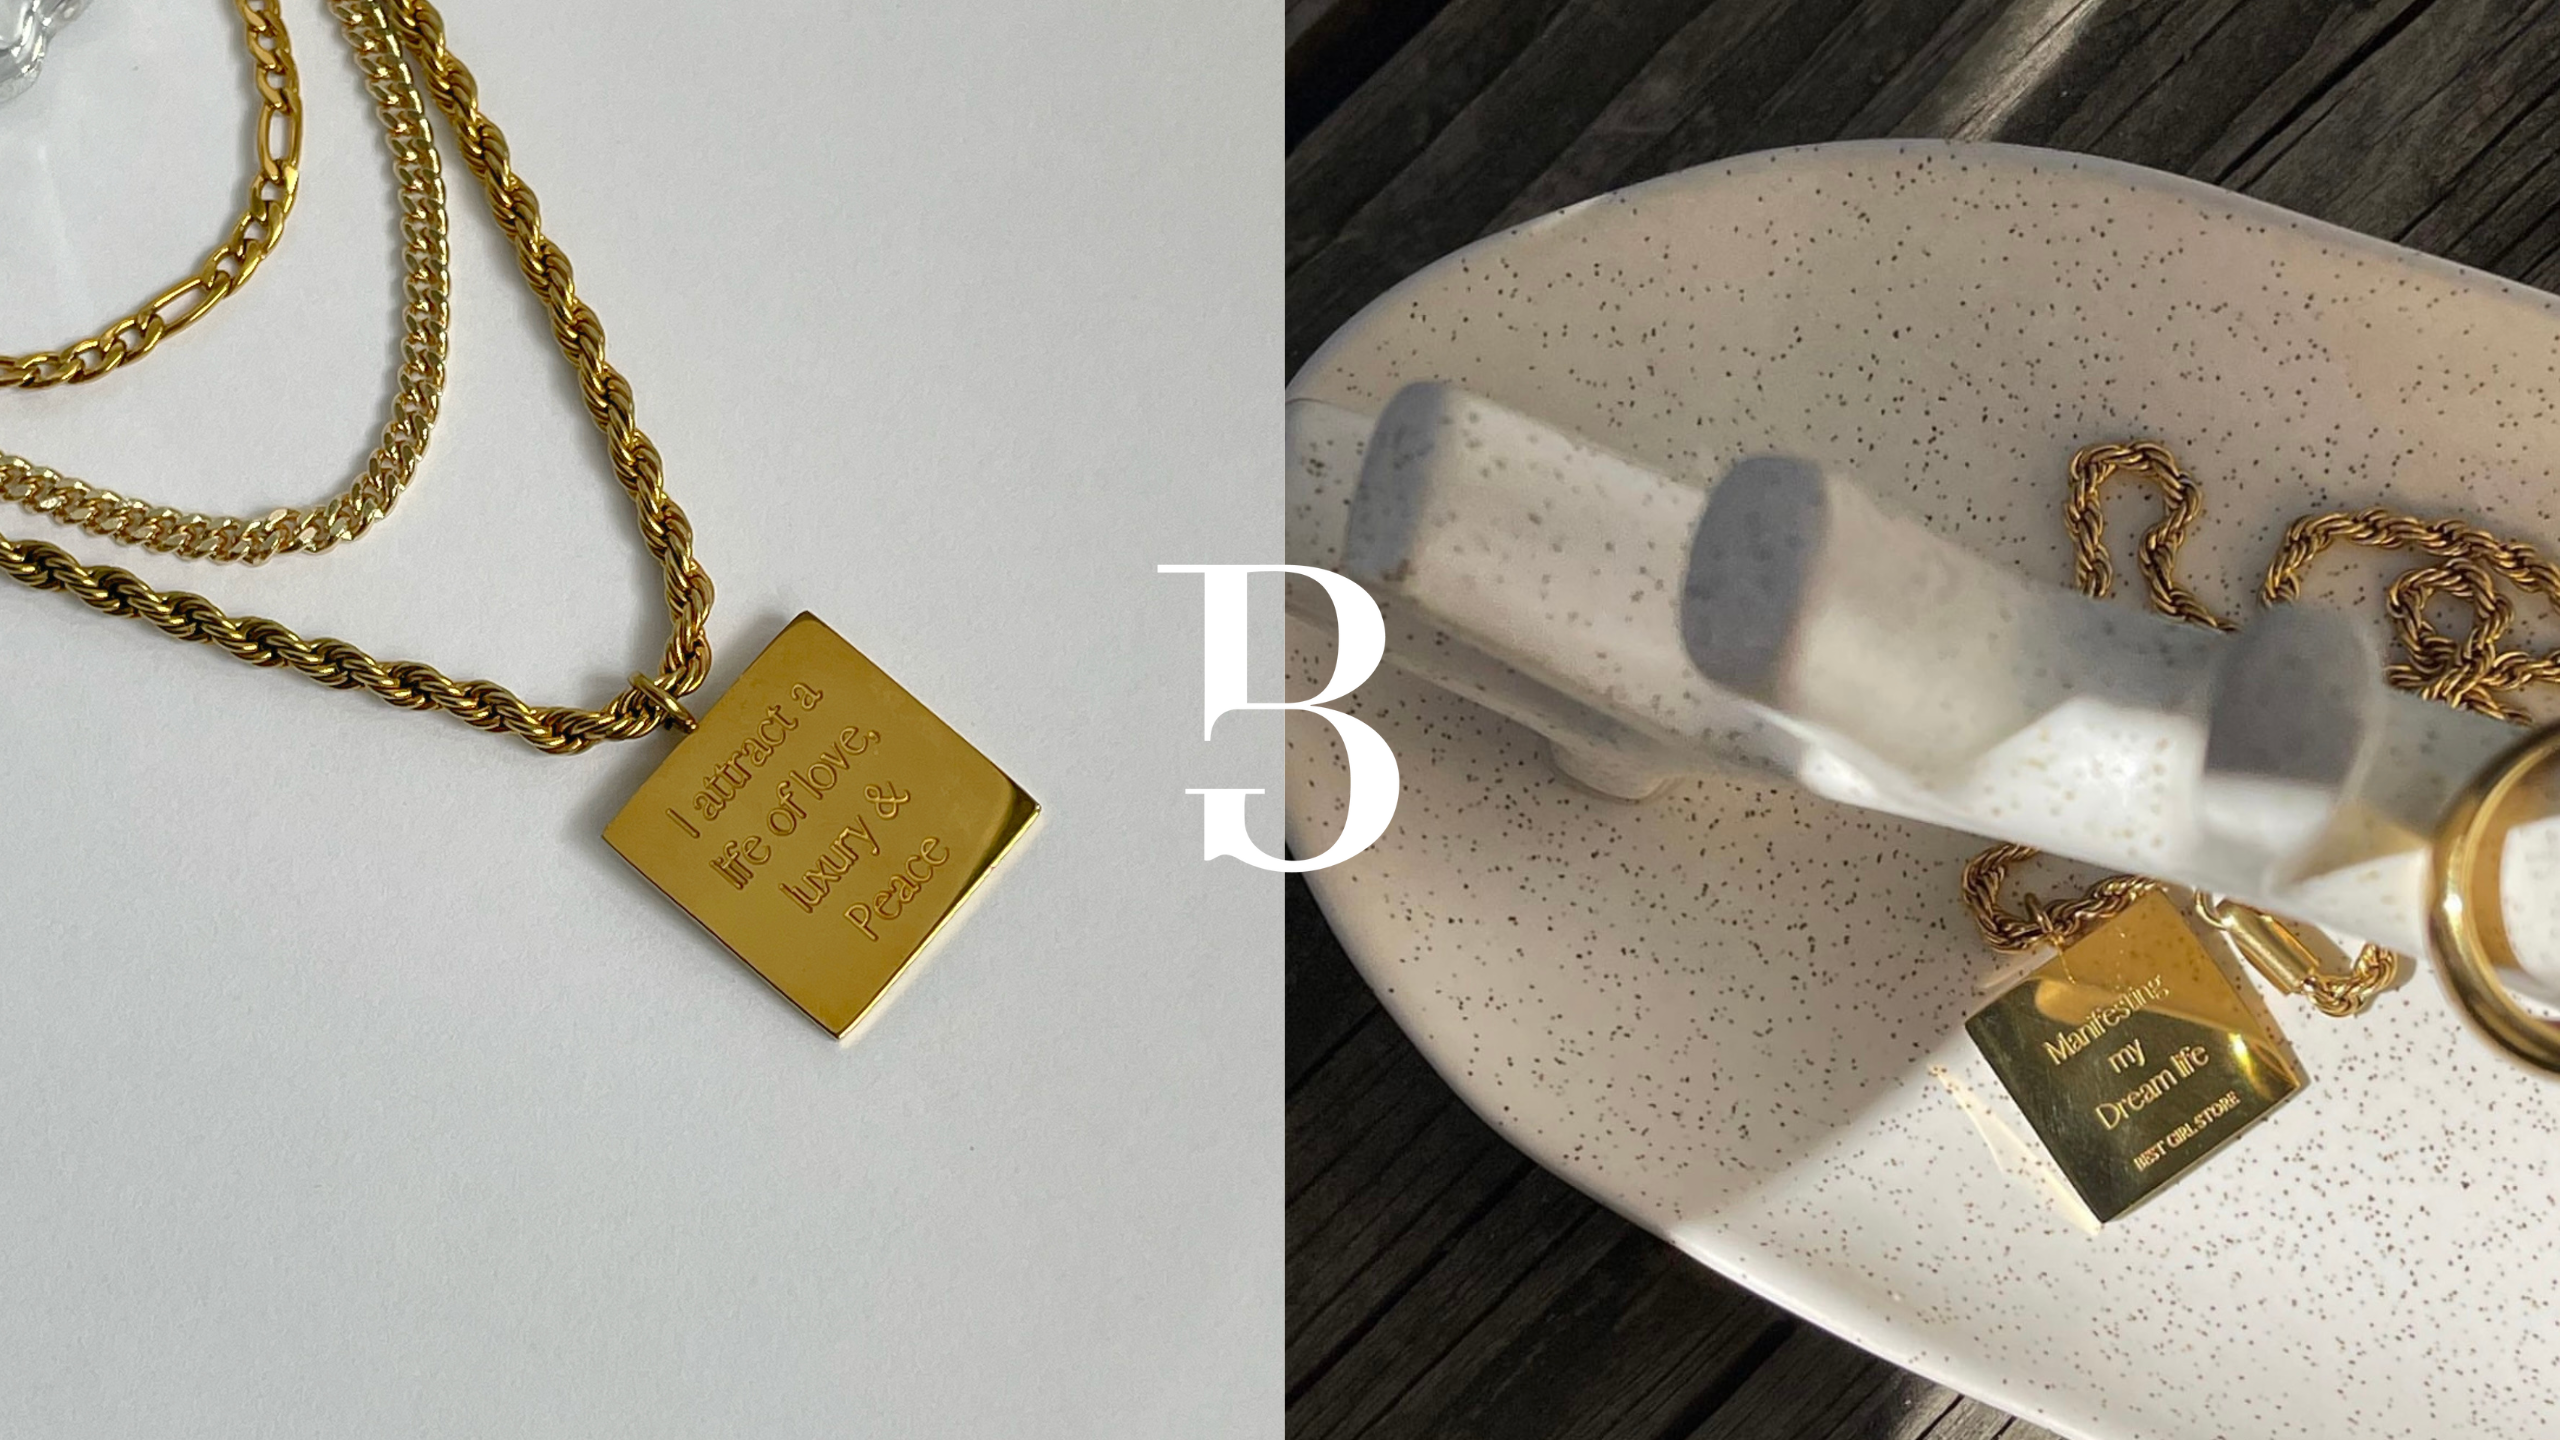 3 Reasons to Add a Self-Love Necklace to Your Jewelry Collection